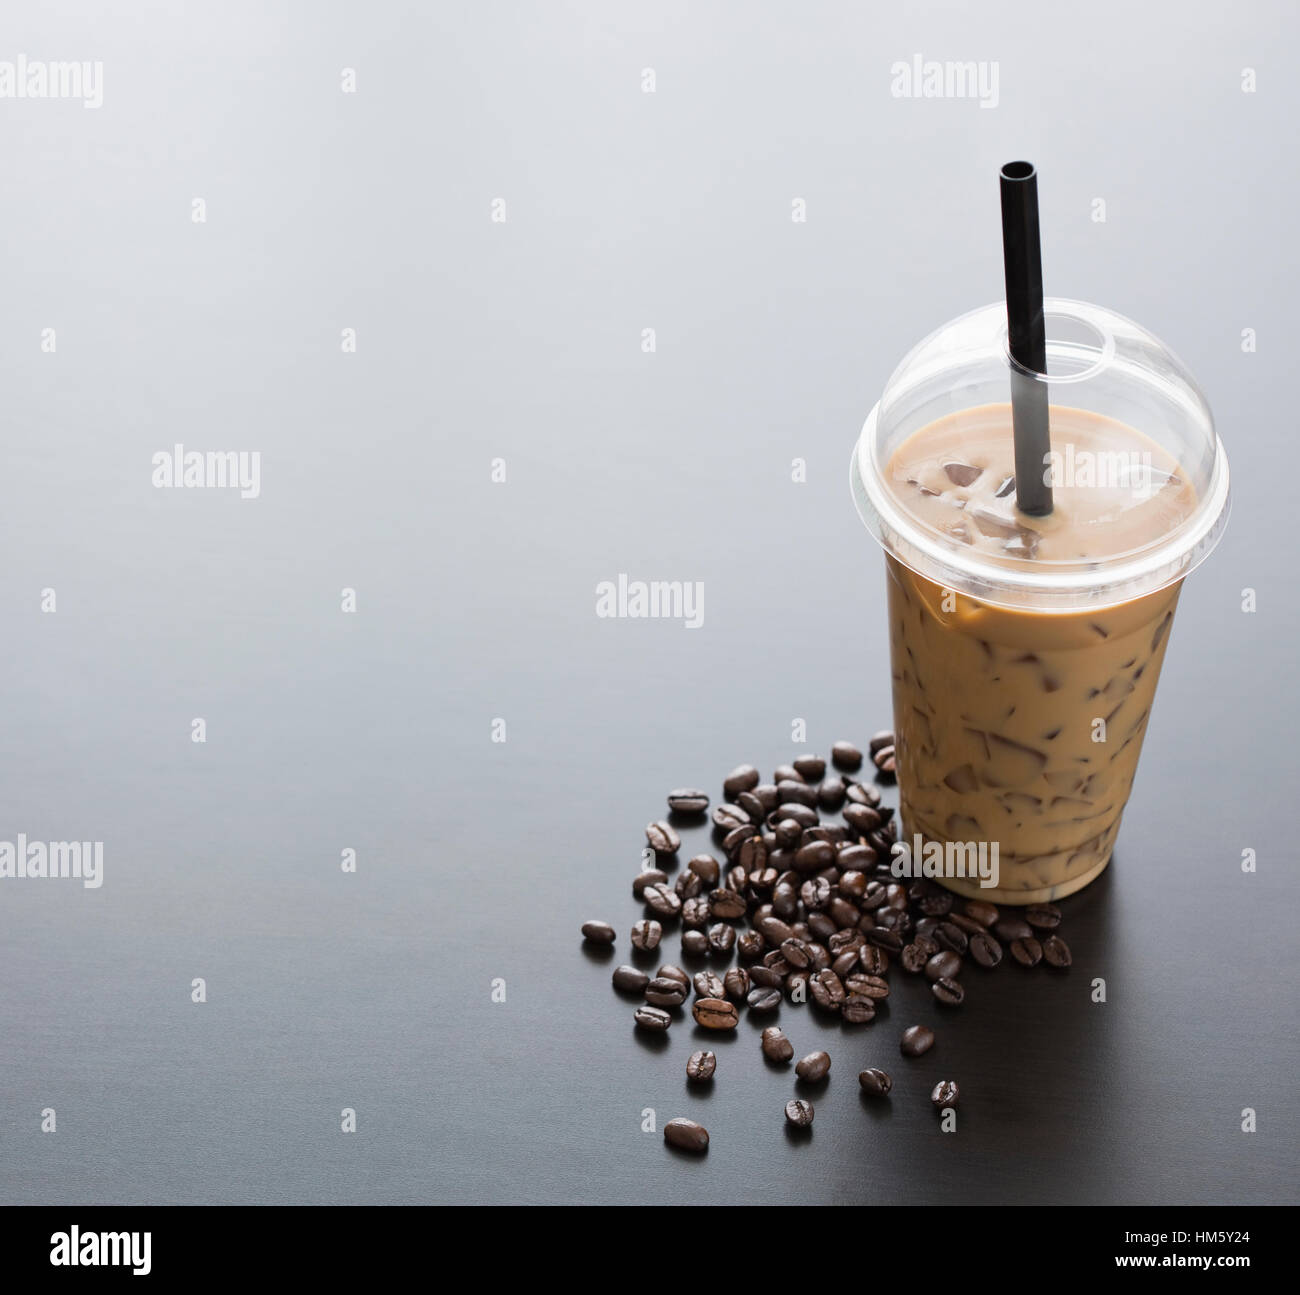 https://c8.alamy.com/comp/HM5Y24/iced-coffee-in-disposable-cup-and-coffee-beans-on-table-HM5Y24.jpg